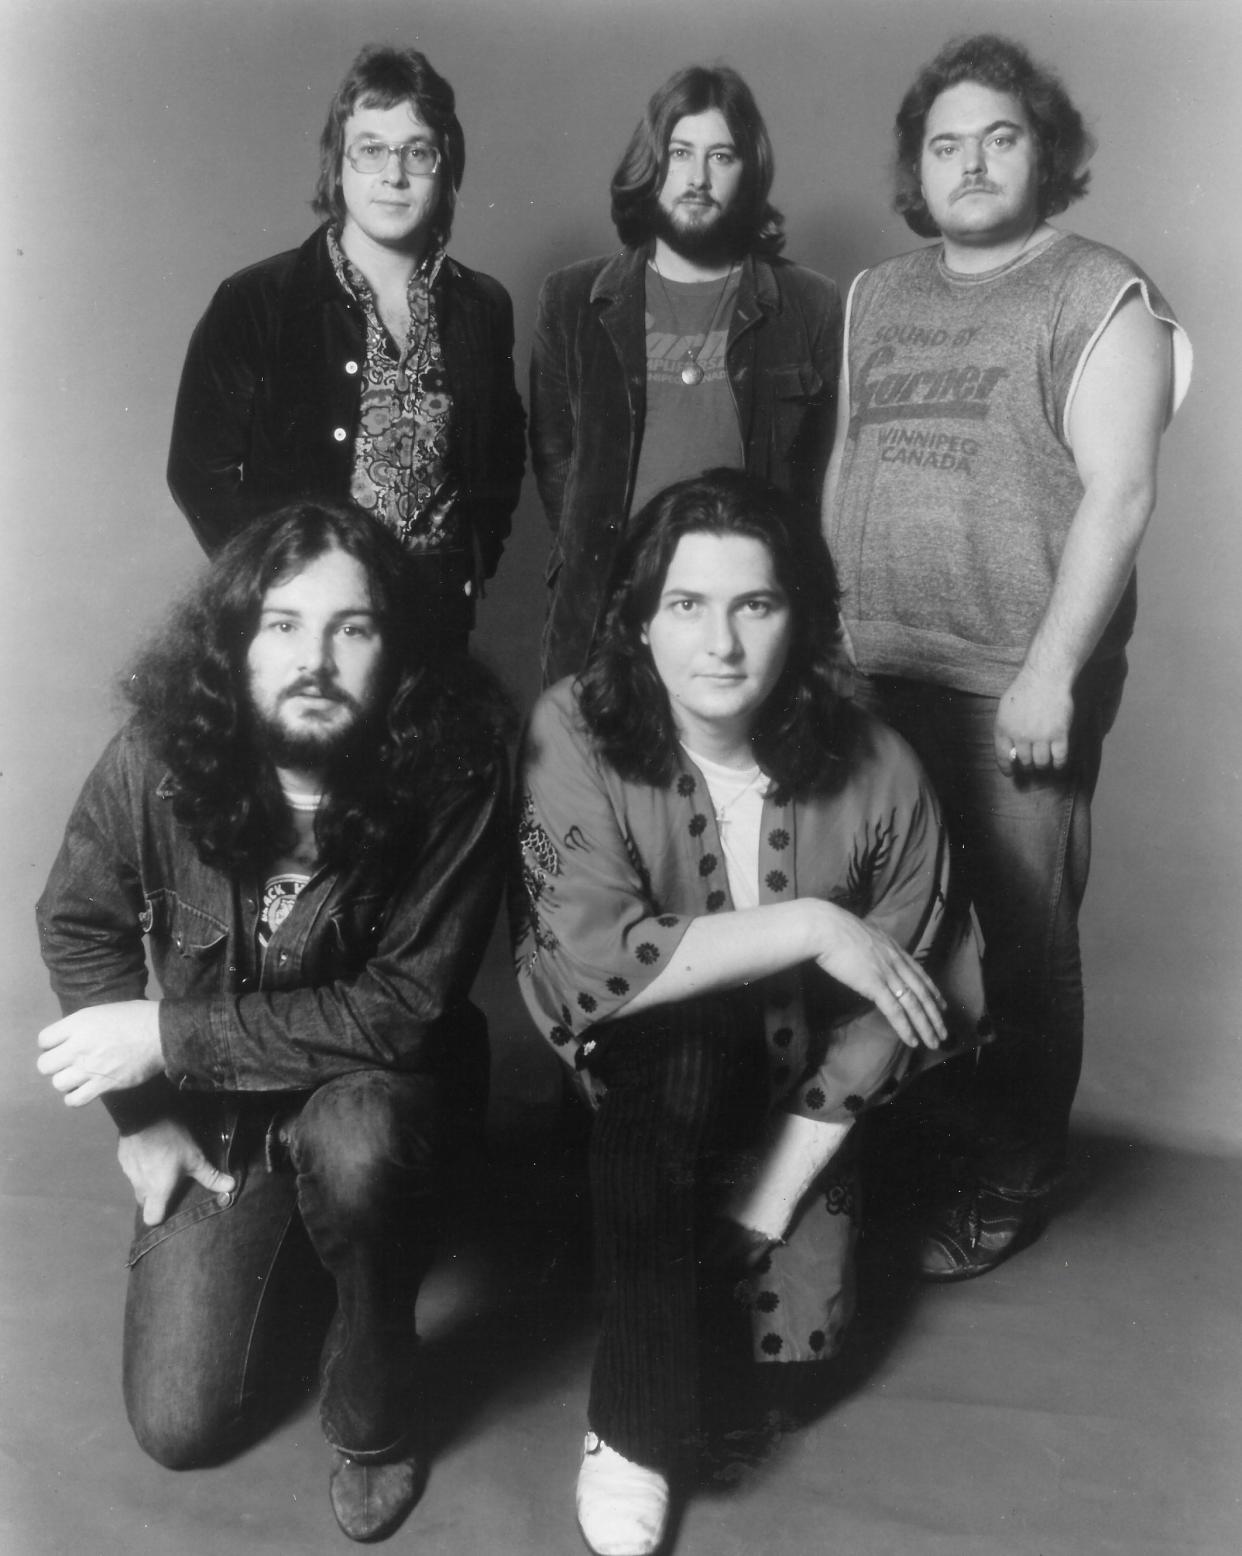 The Guess Who, a rock band from Canada, had 1970s hits with “American Woman,” “These Eyes” and “No Time.”